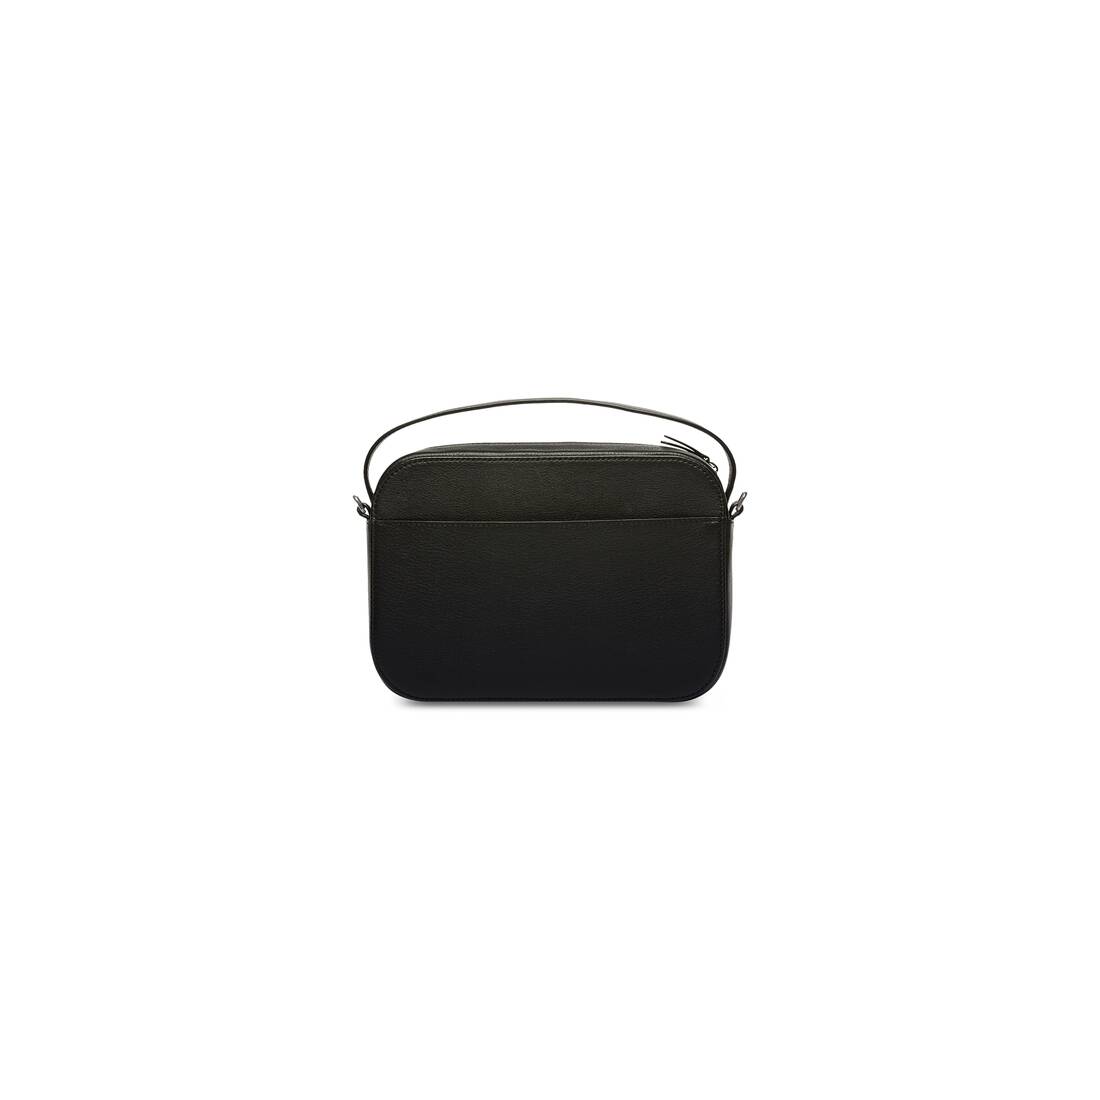 Balenciaga Everyday Camera Bag XS Black in Calfskin Leather with  Silver-tone - US